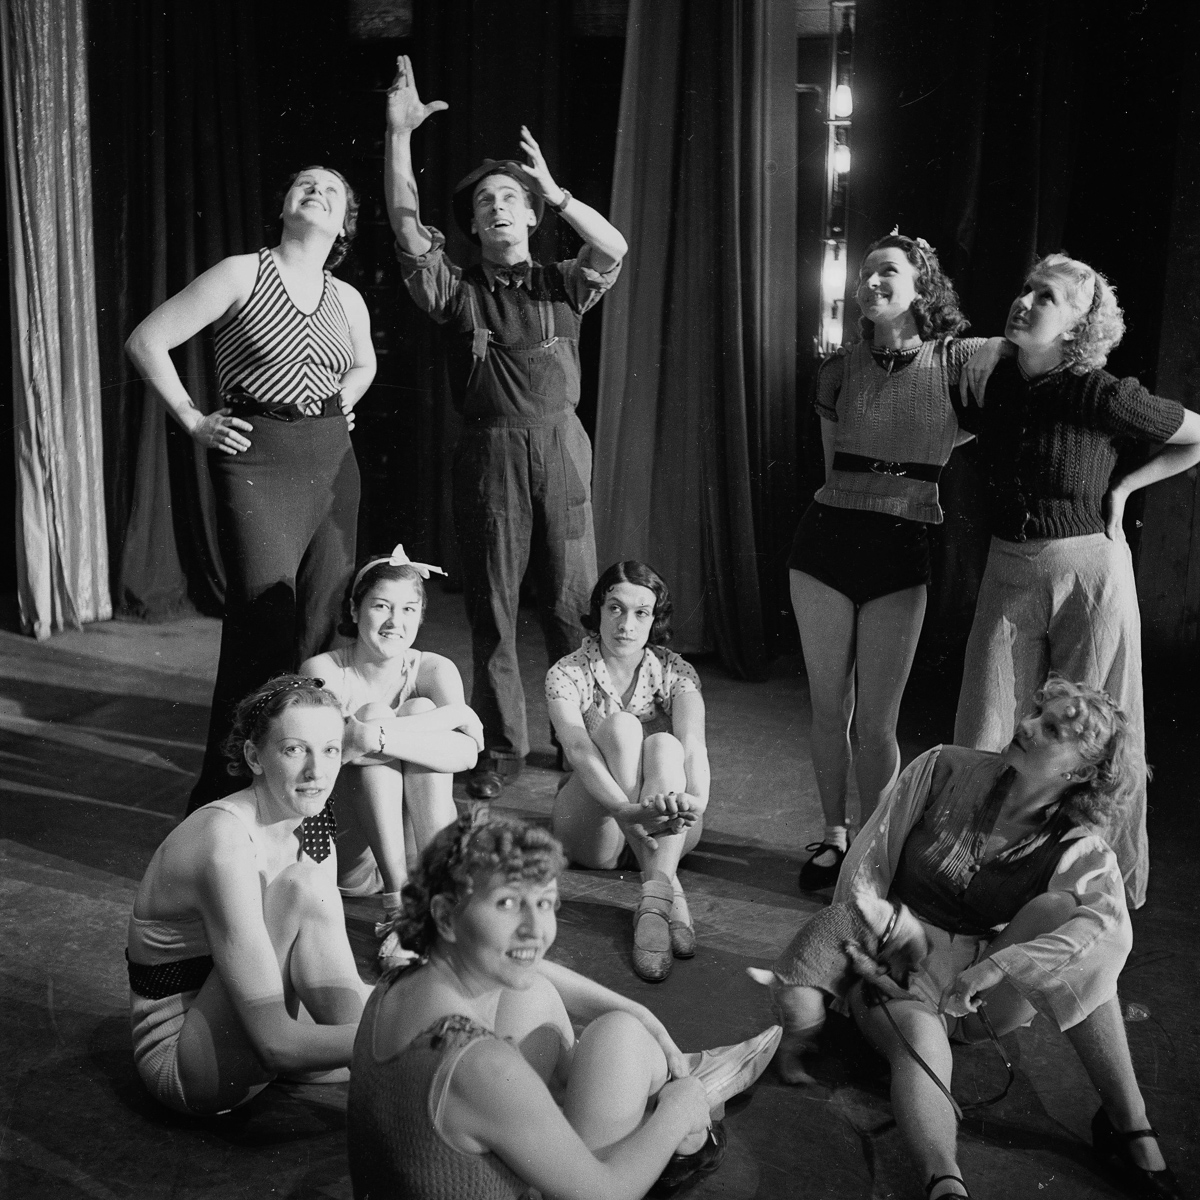 Rehearsal in Folies-Bergere. Paris, about 1937-193